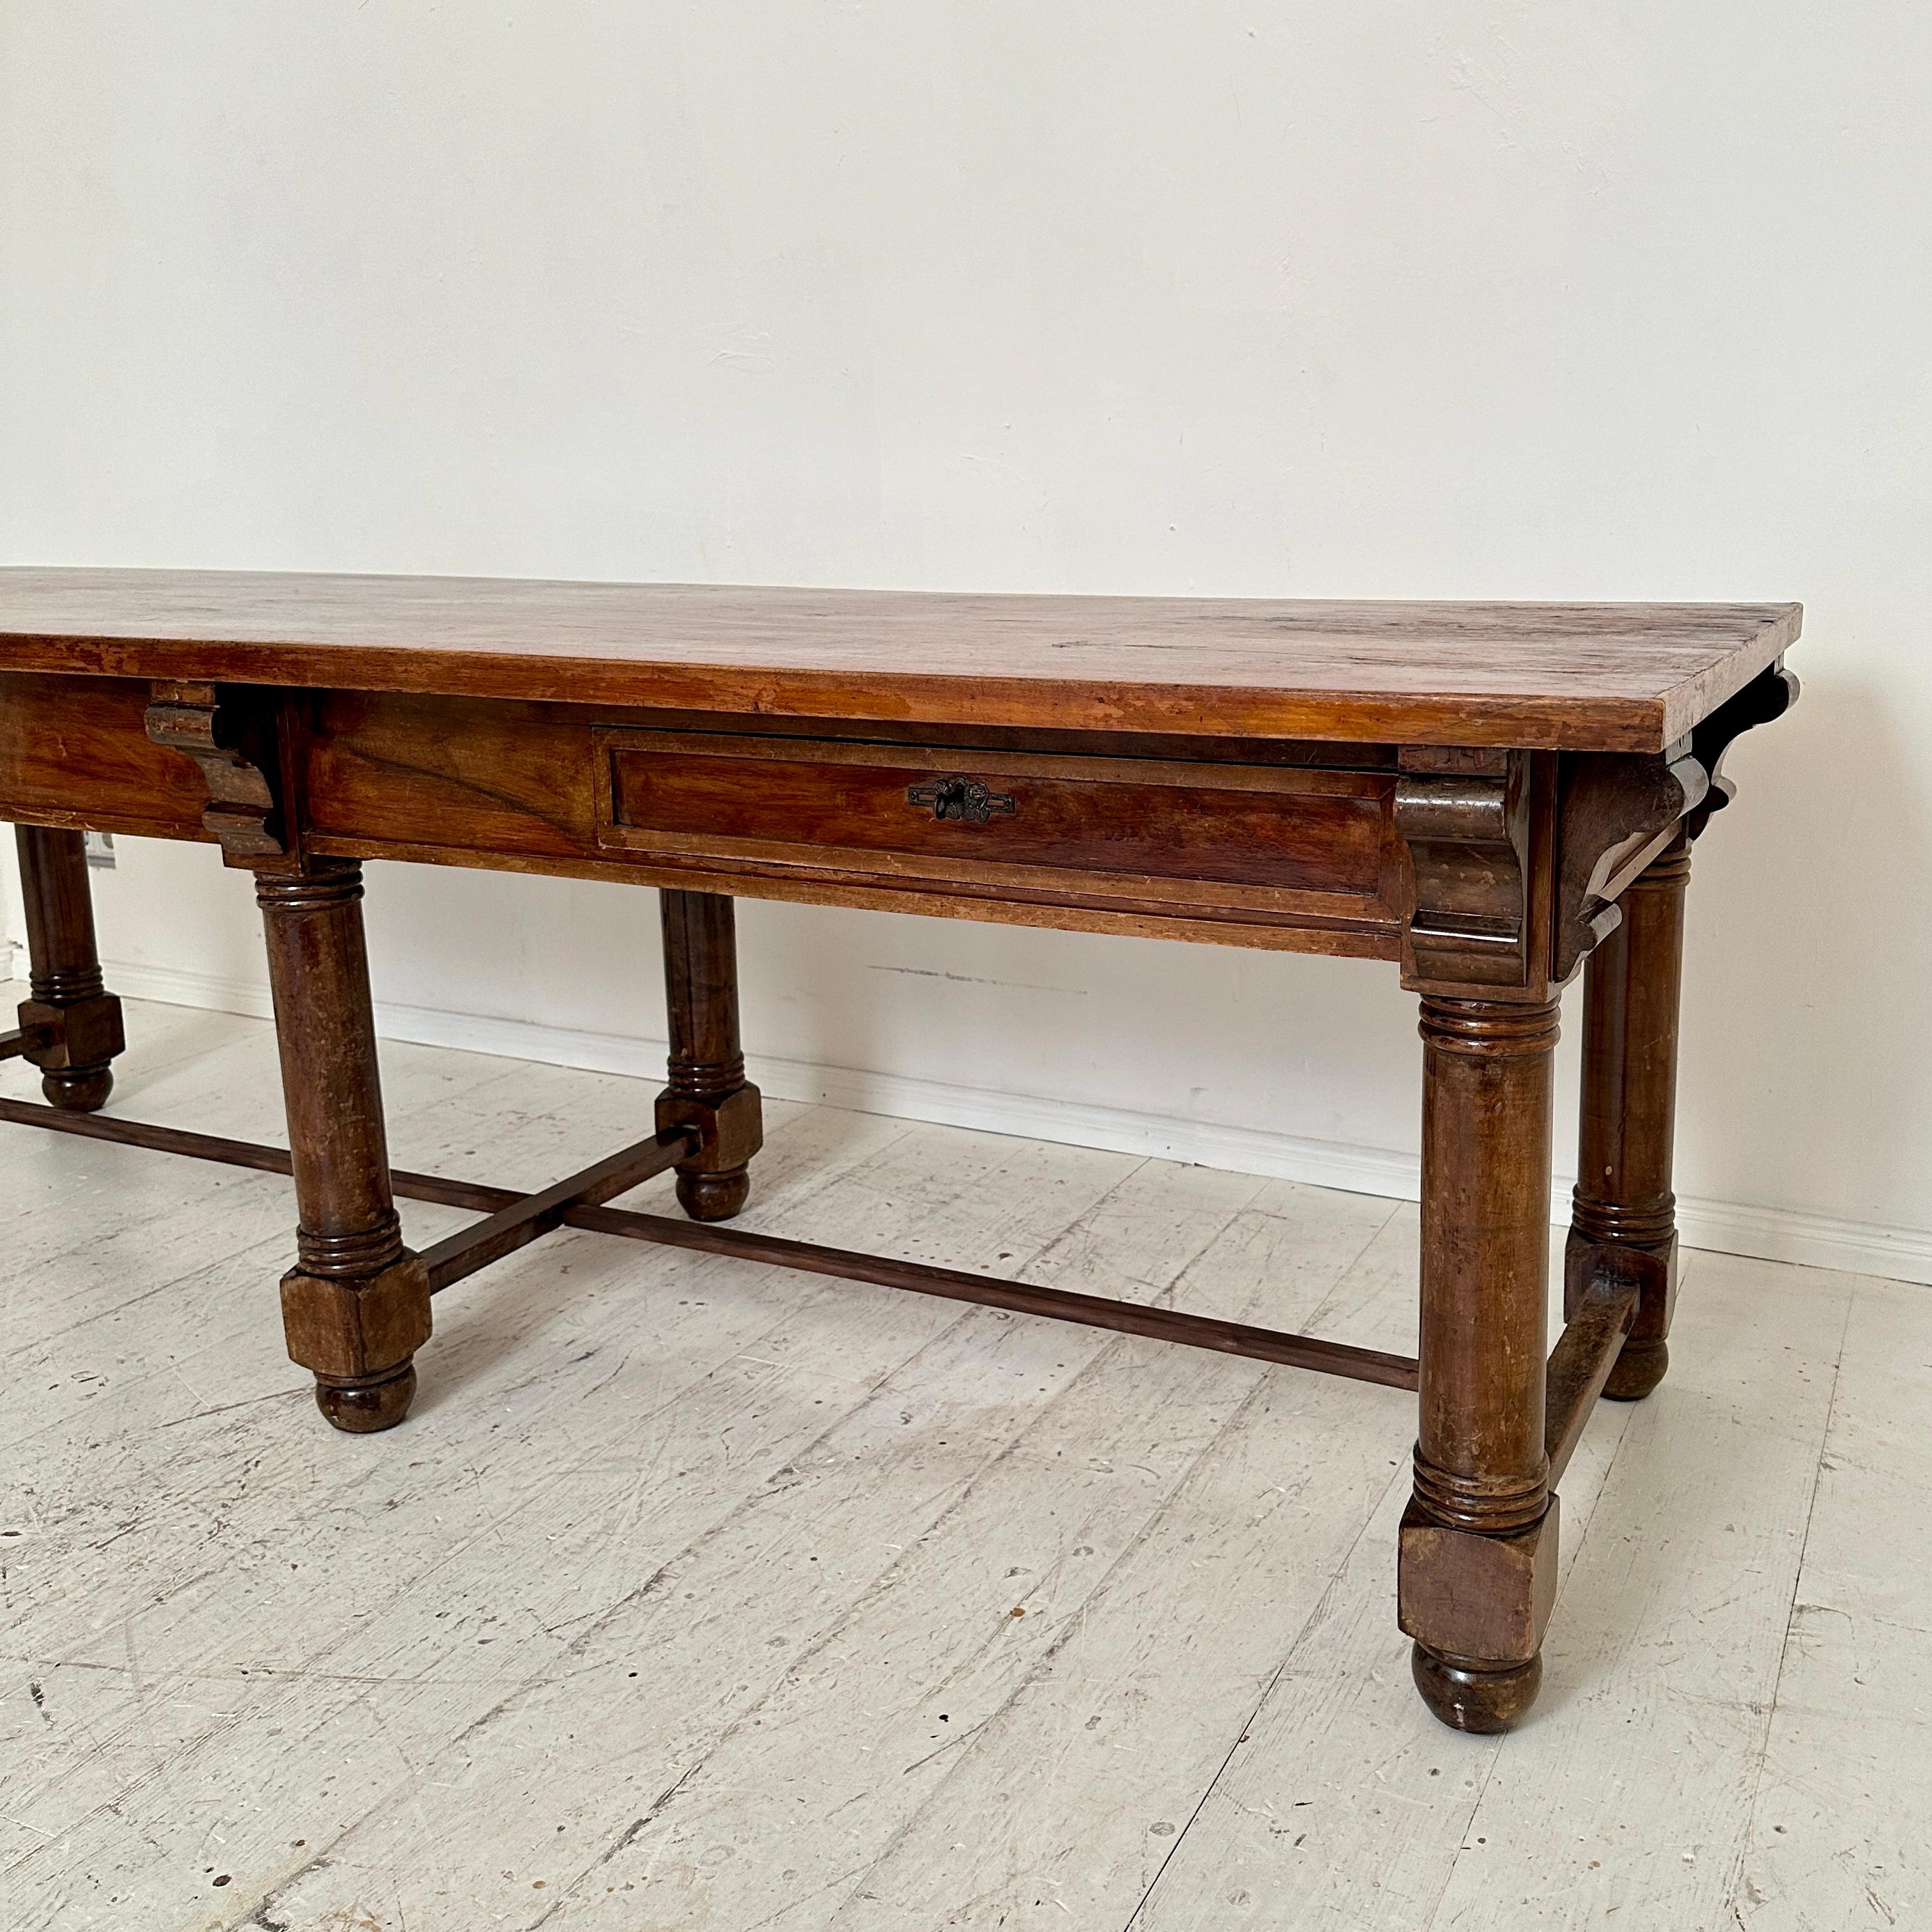 Late 19th Century Italian Large Brown Walnut Dining Table with 2 Drawers, 1880 For Sale 4